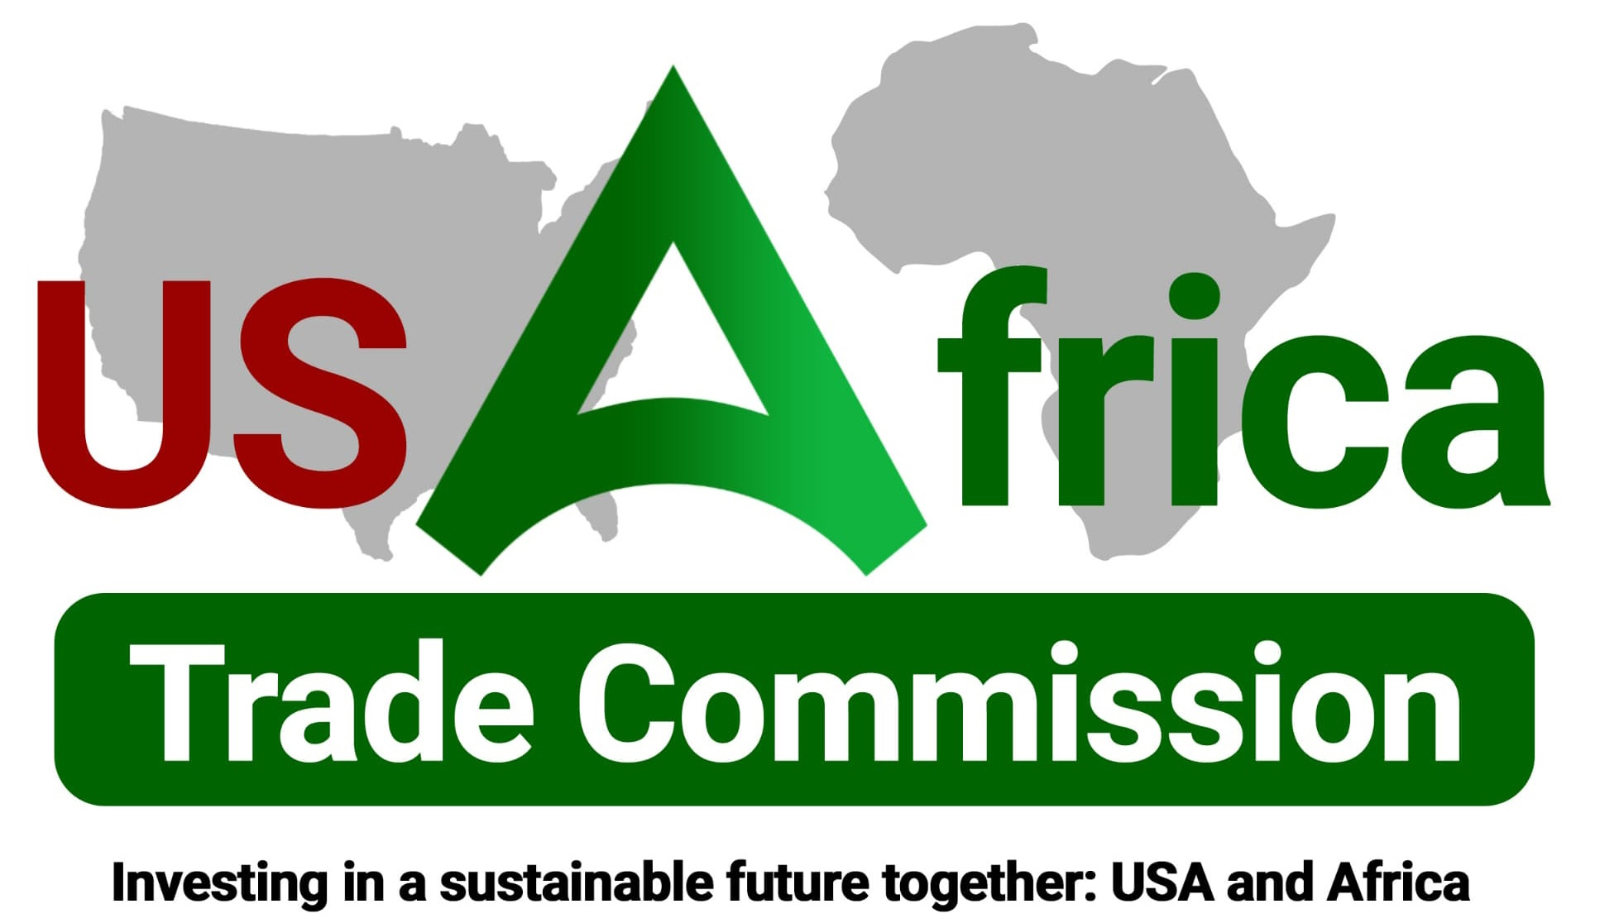 WELCOME TO THE U.S.-AFRICA TRADE COMMISSION